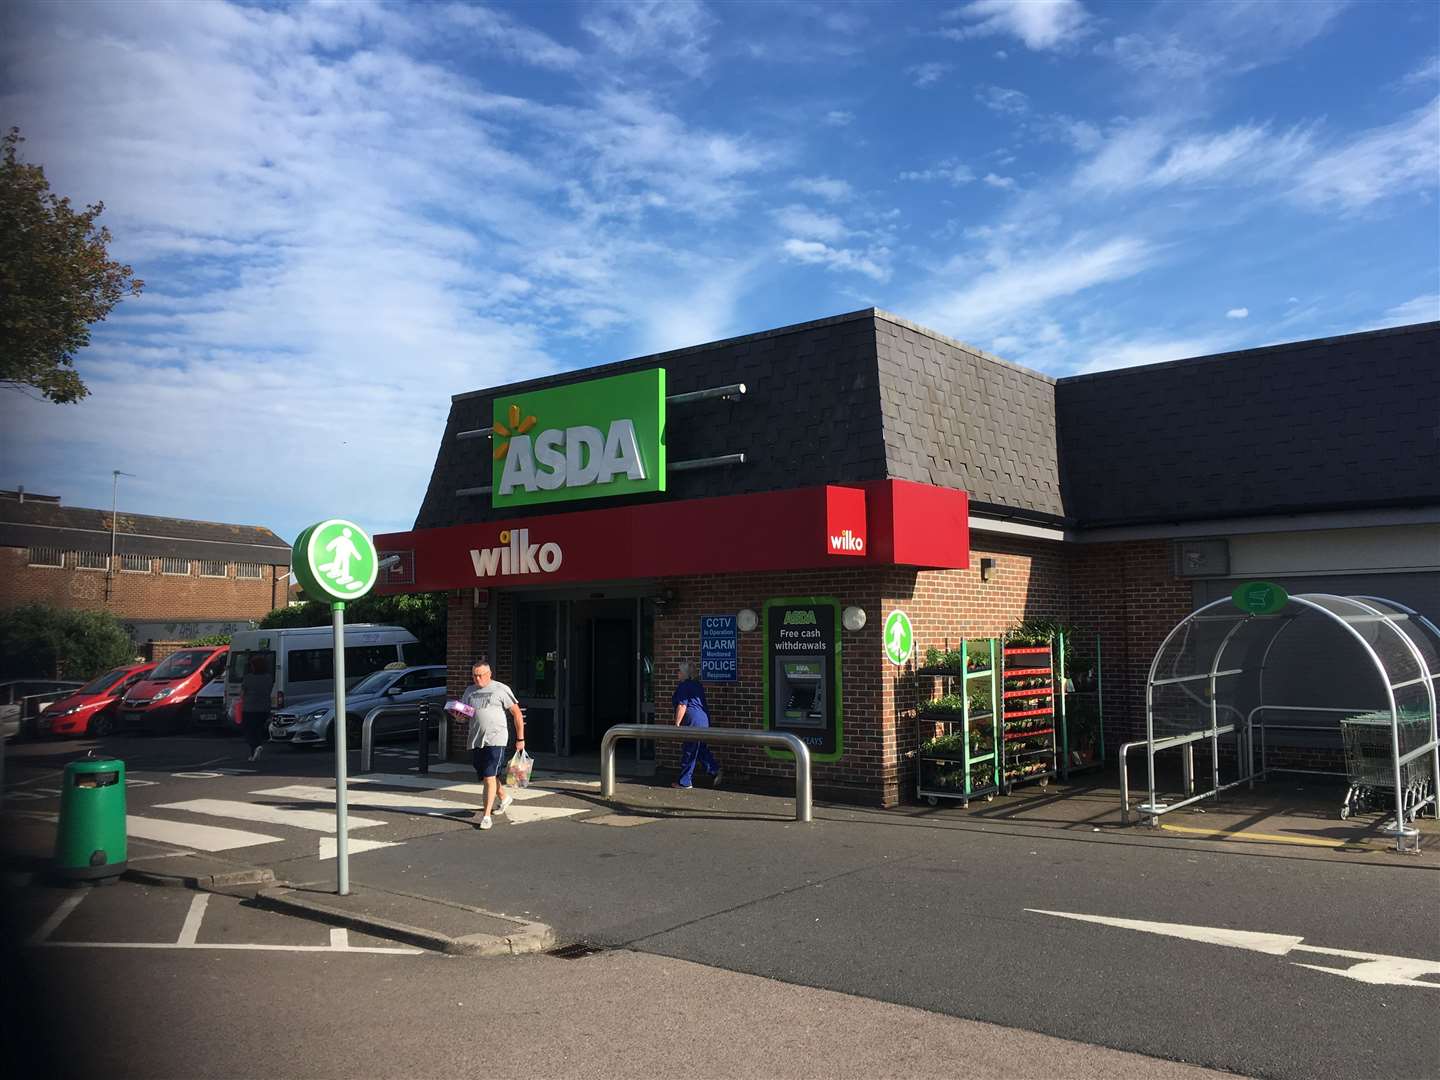 The incident happened in the car park at Asda in Strood